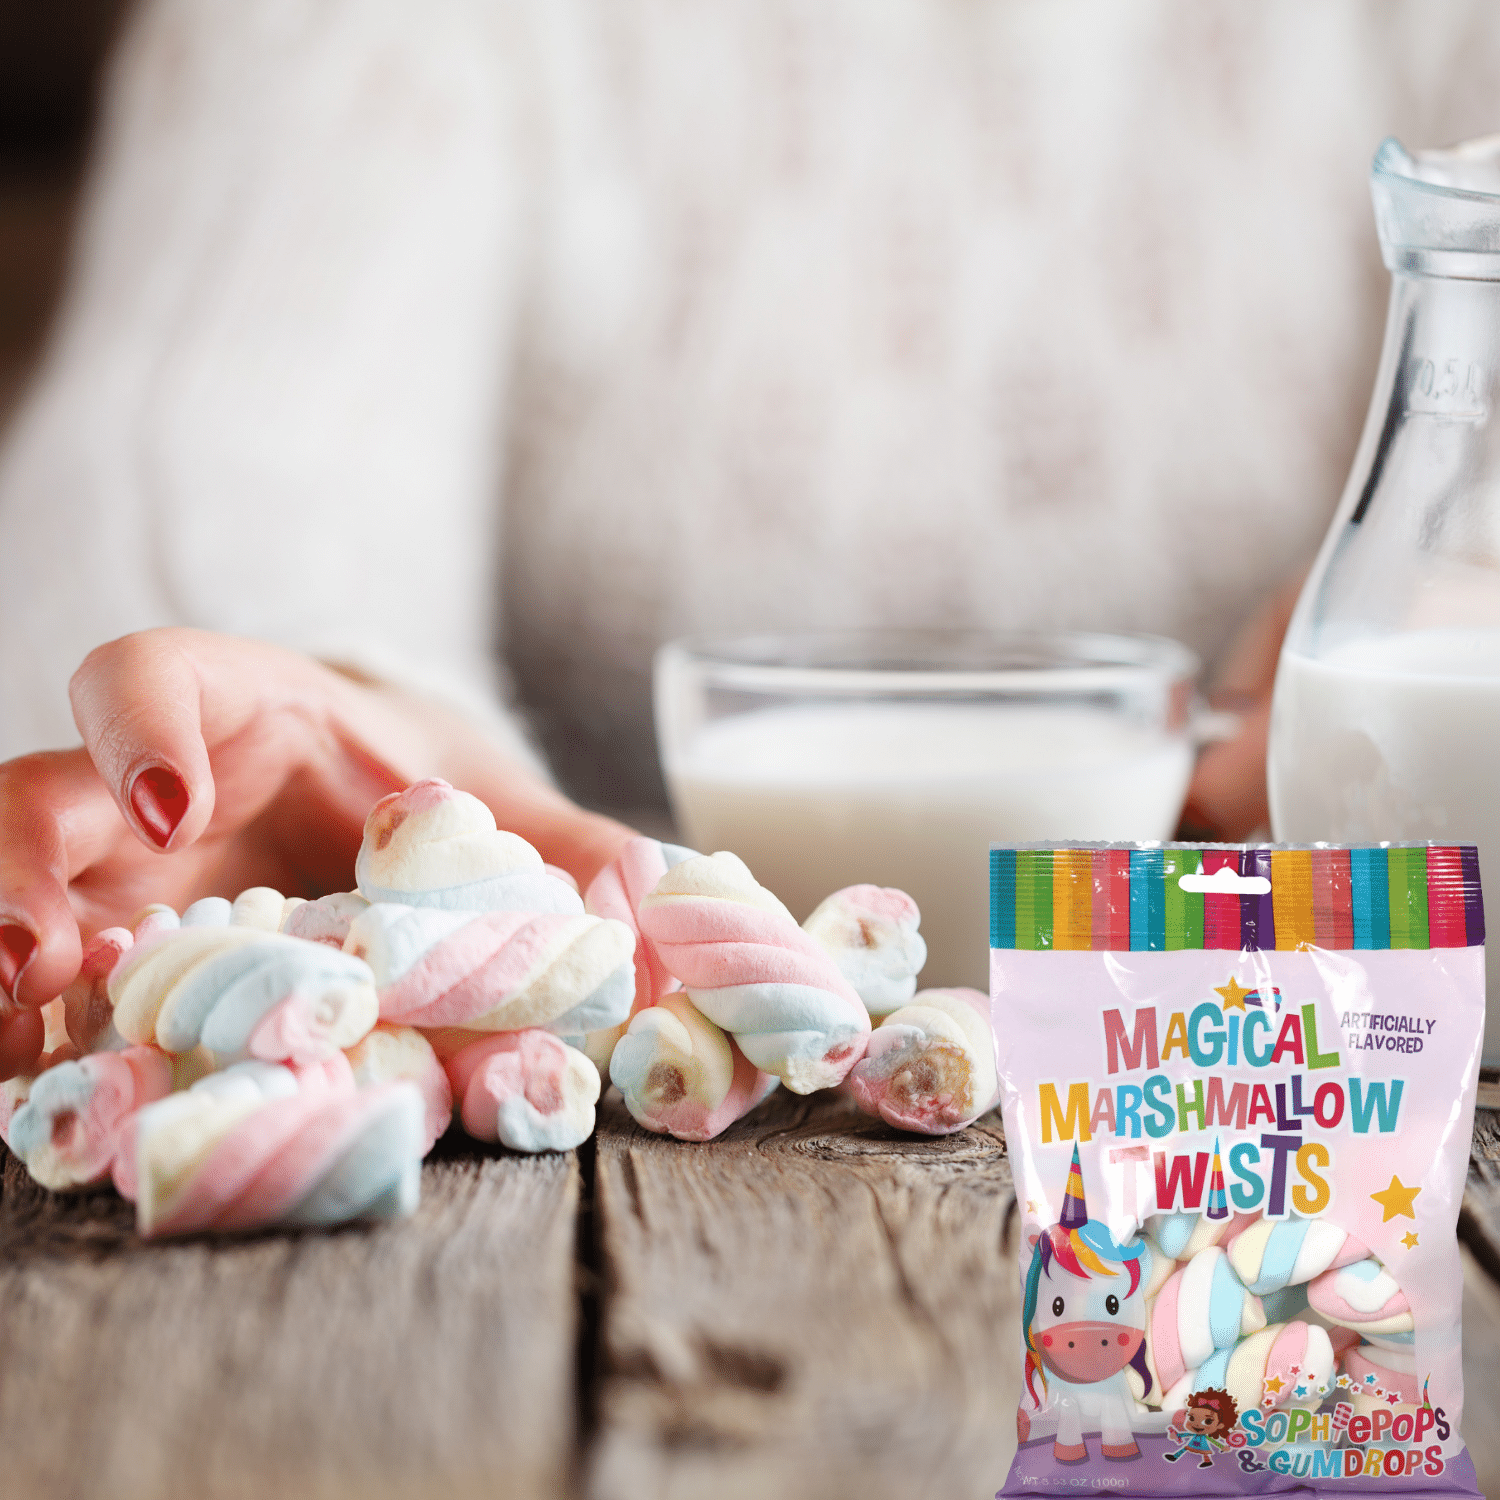 Marshmallow Twists Candy 3.53-oz. Bag with Swirled Rainbow Colors Great for Snacking Kid's Lunchbox Movie Nights Halloween Trick or Treats, Goody Fillers & Birthday Party Favor 2 Packs - image 4 of 6